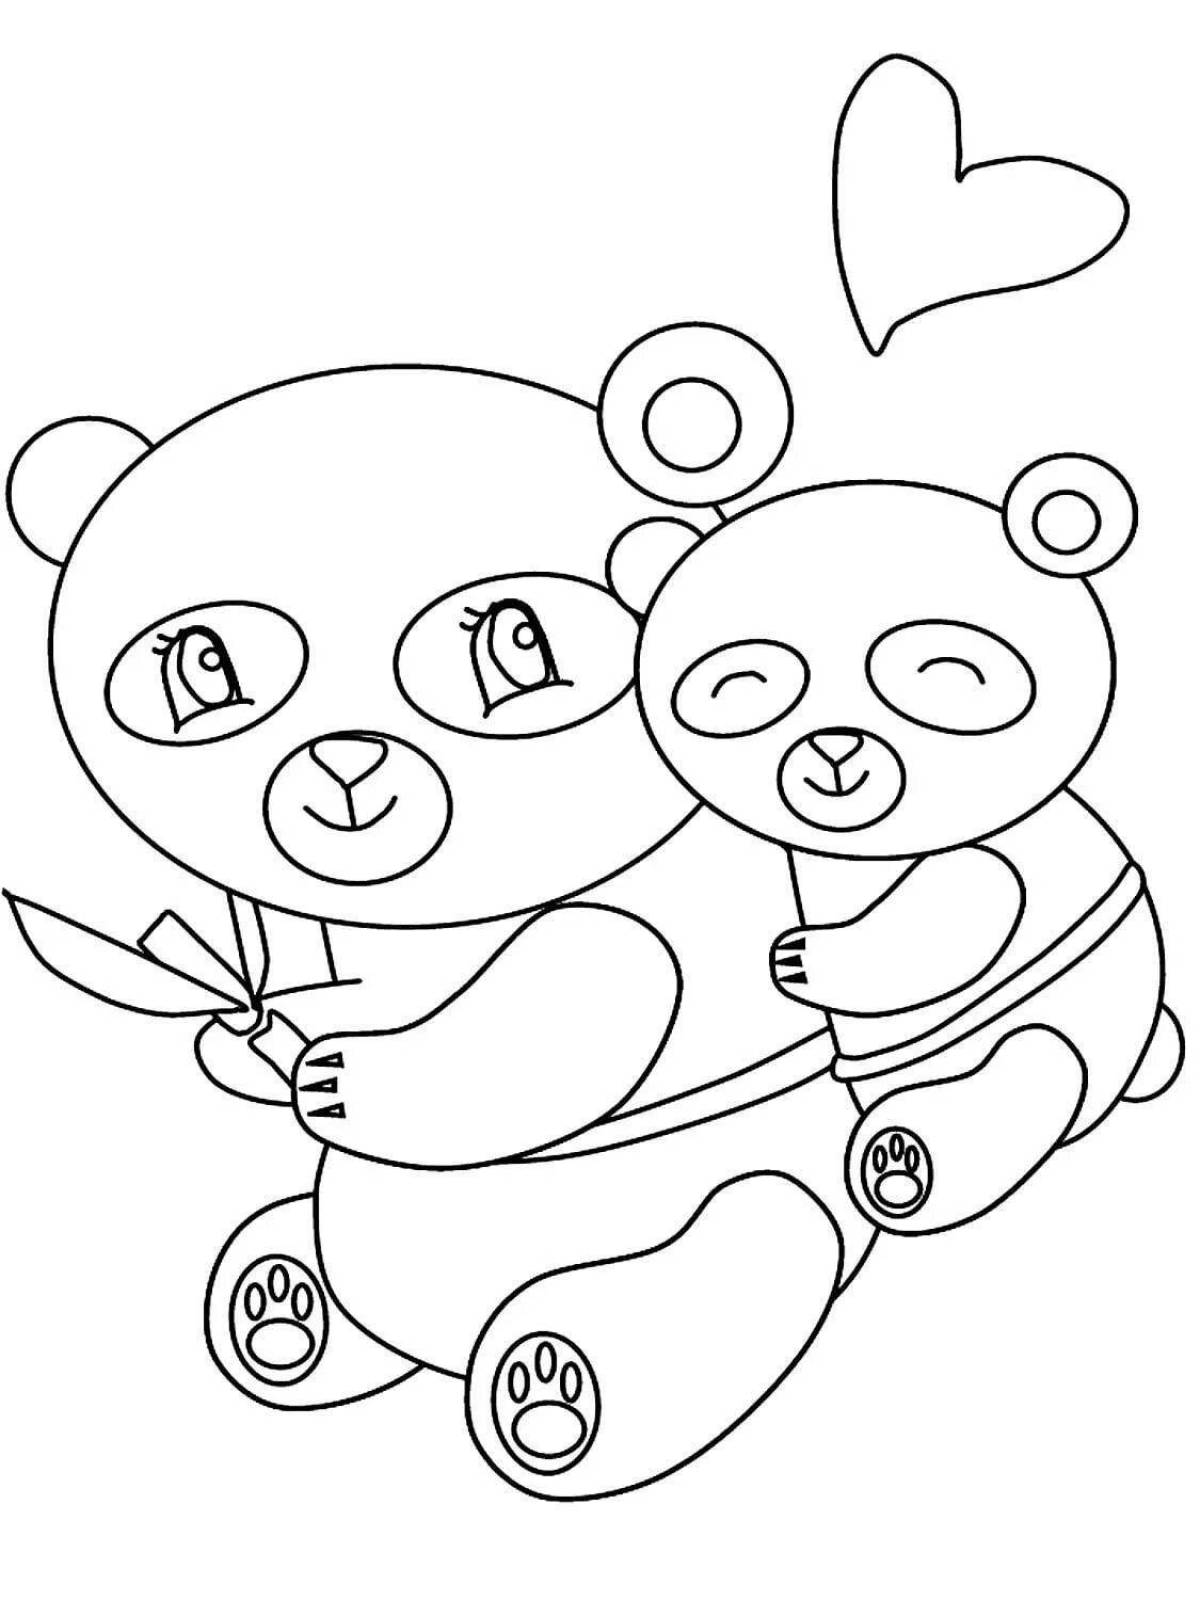 Awesome panda coloring book for kids